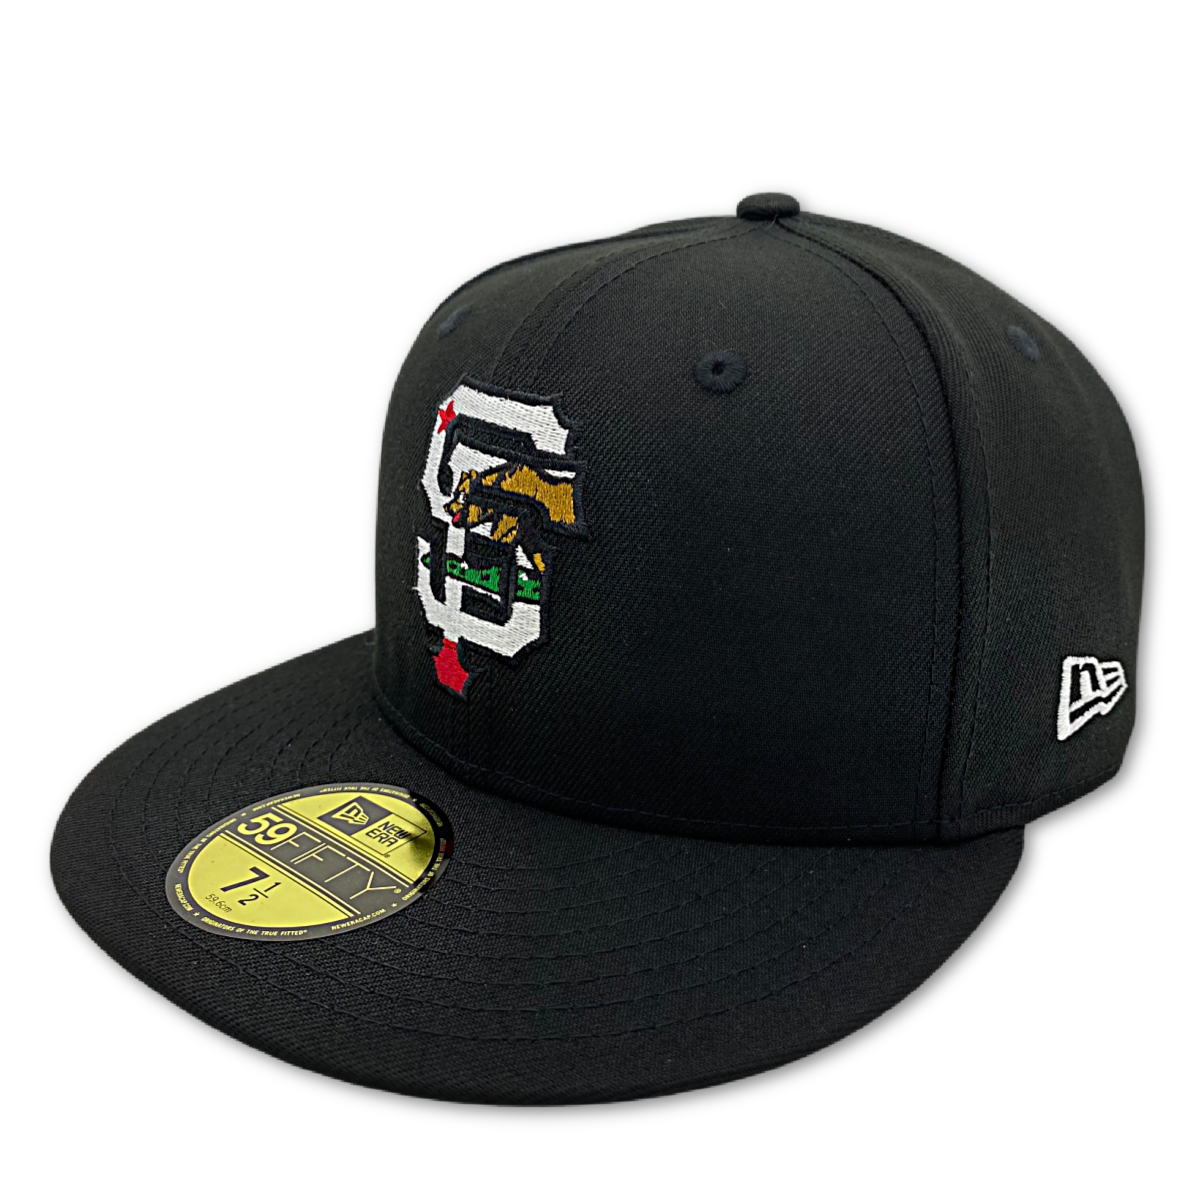 SAN FRANCISCO GIANTS NEW ERA CA BEAR 59FIFTY FITTED HAT-BLACK